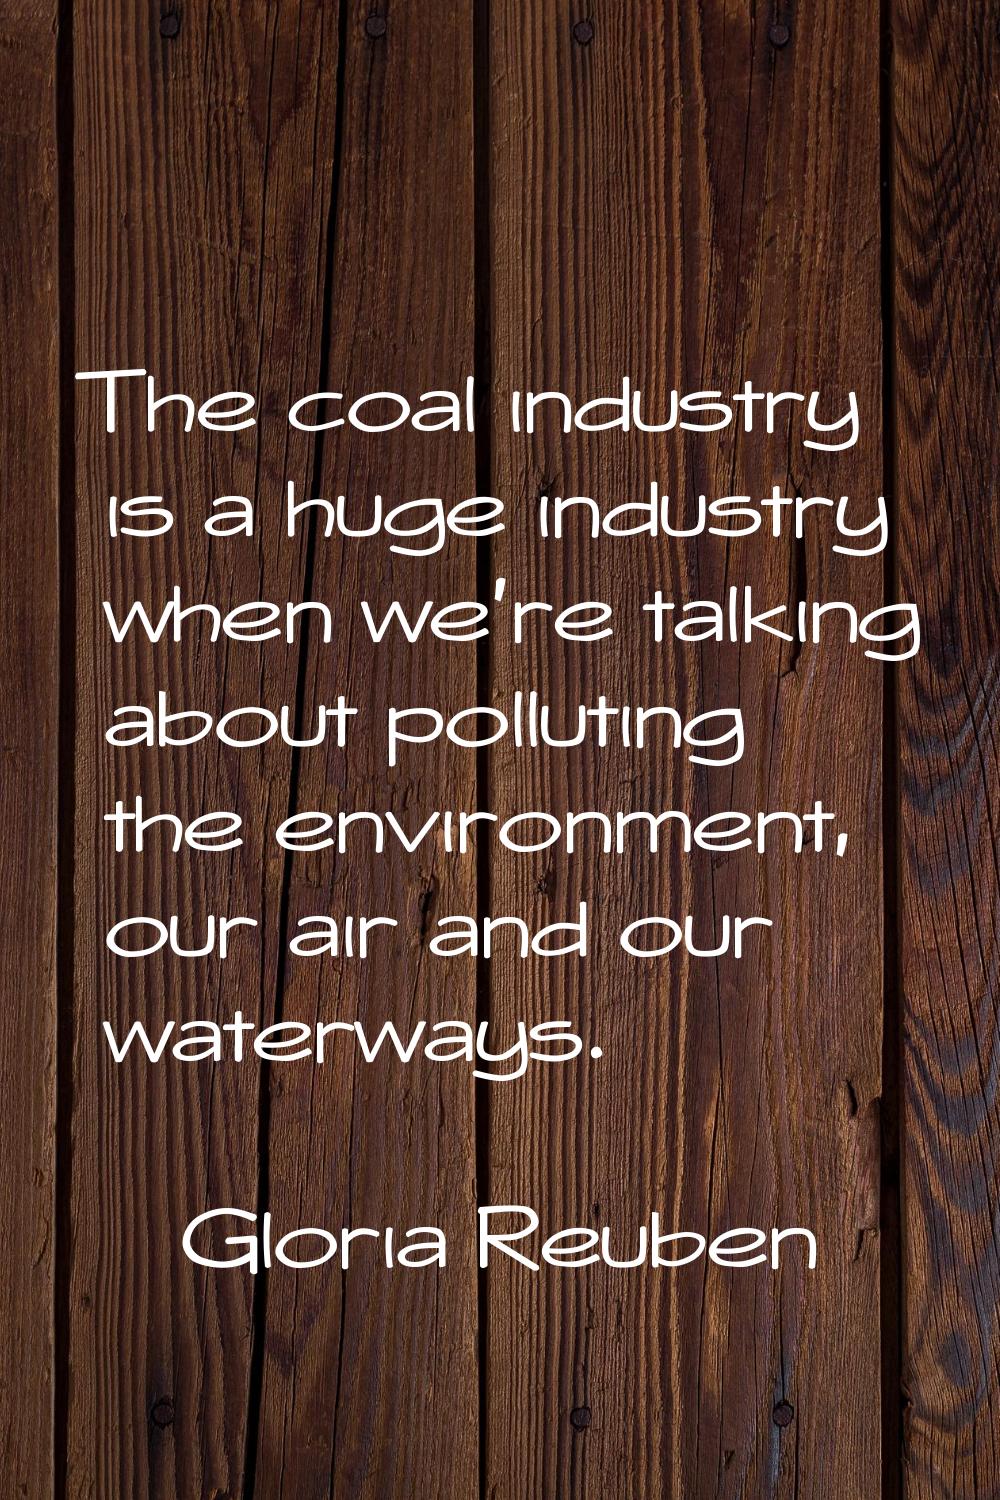 The coal industry is a huge industry when we're talking about polluting the environment, our air an